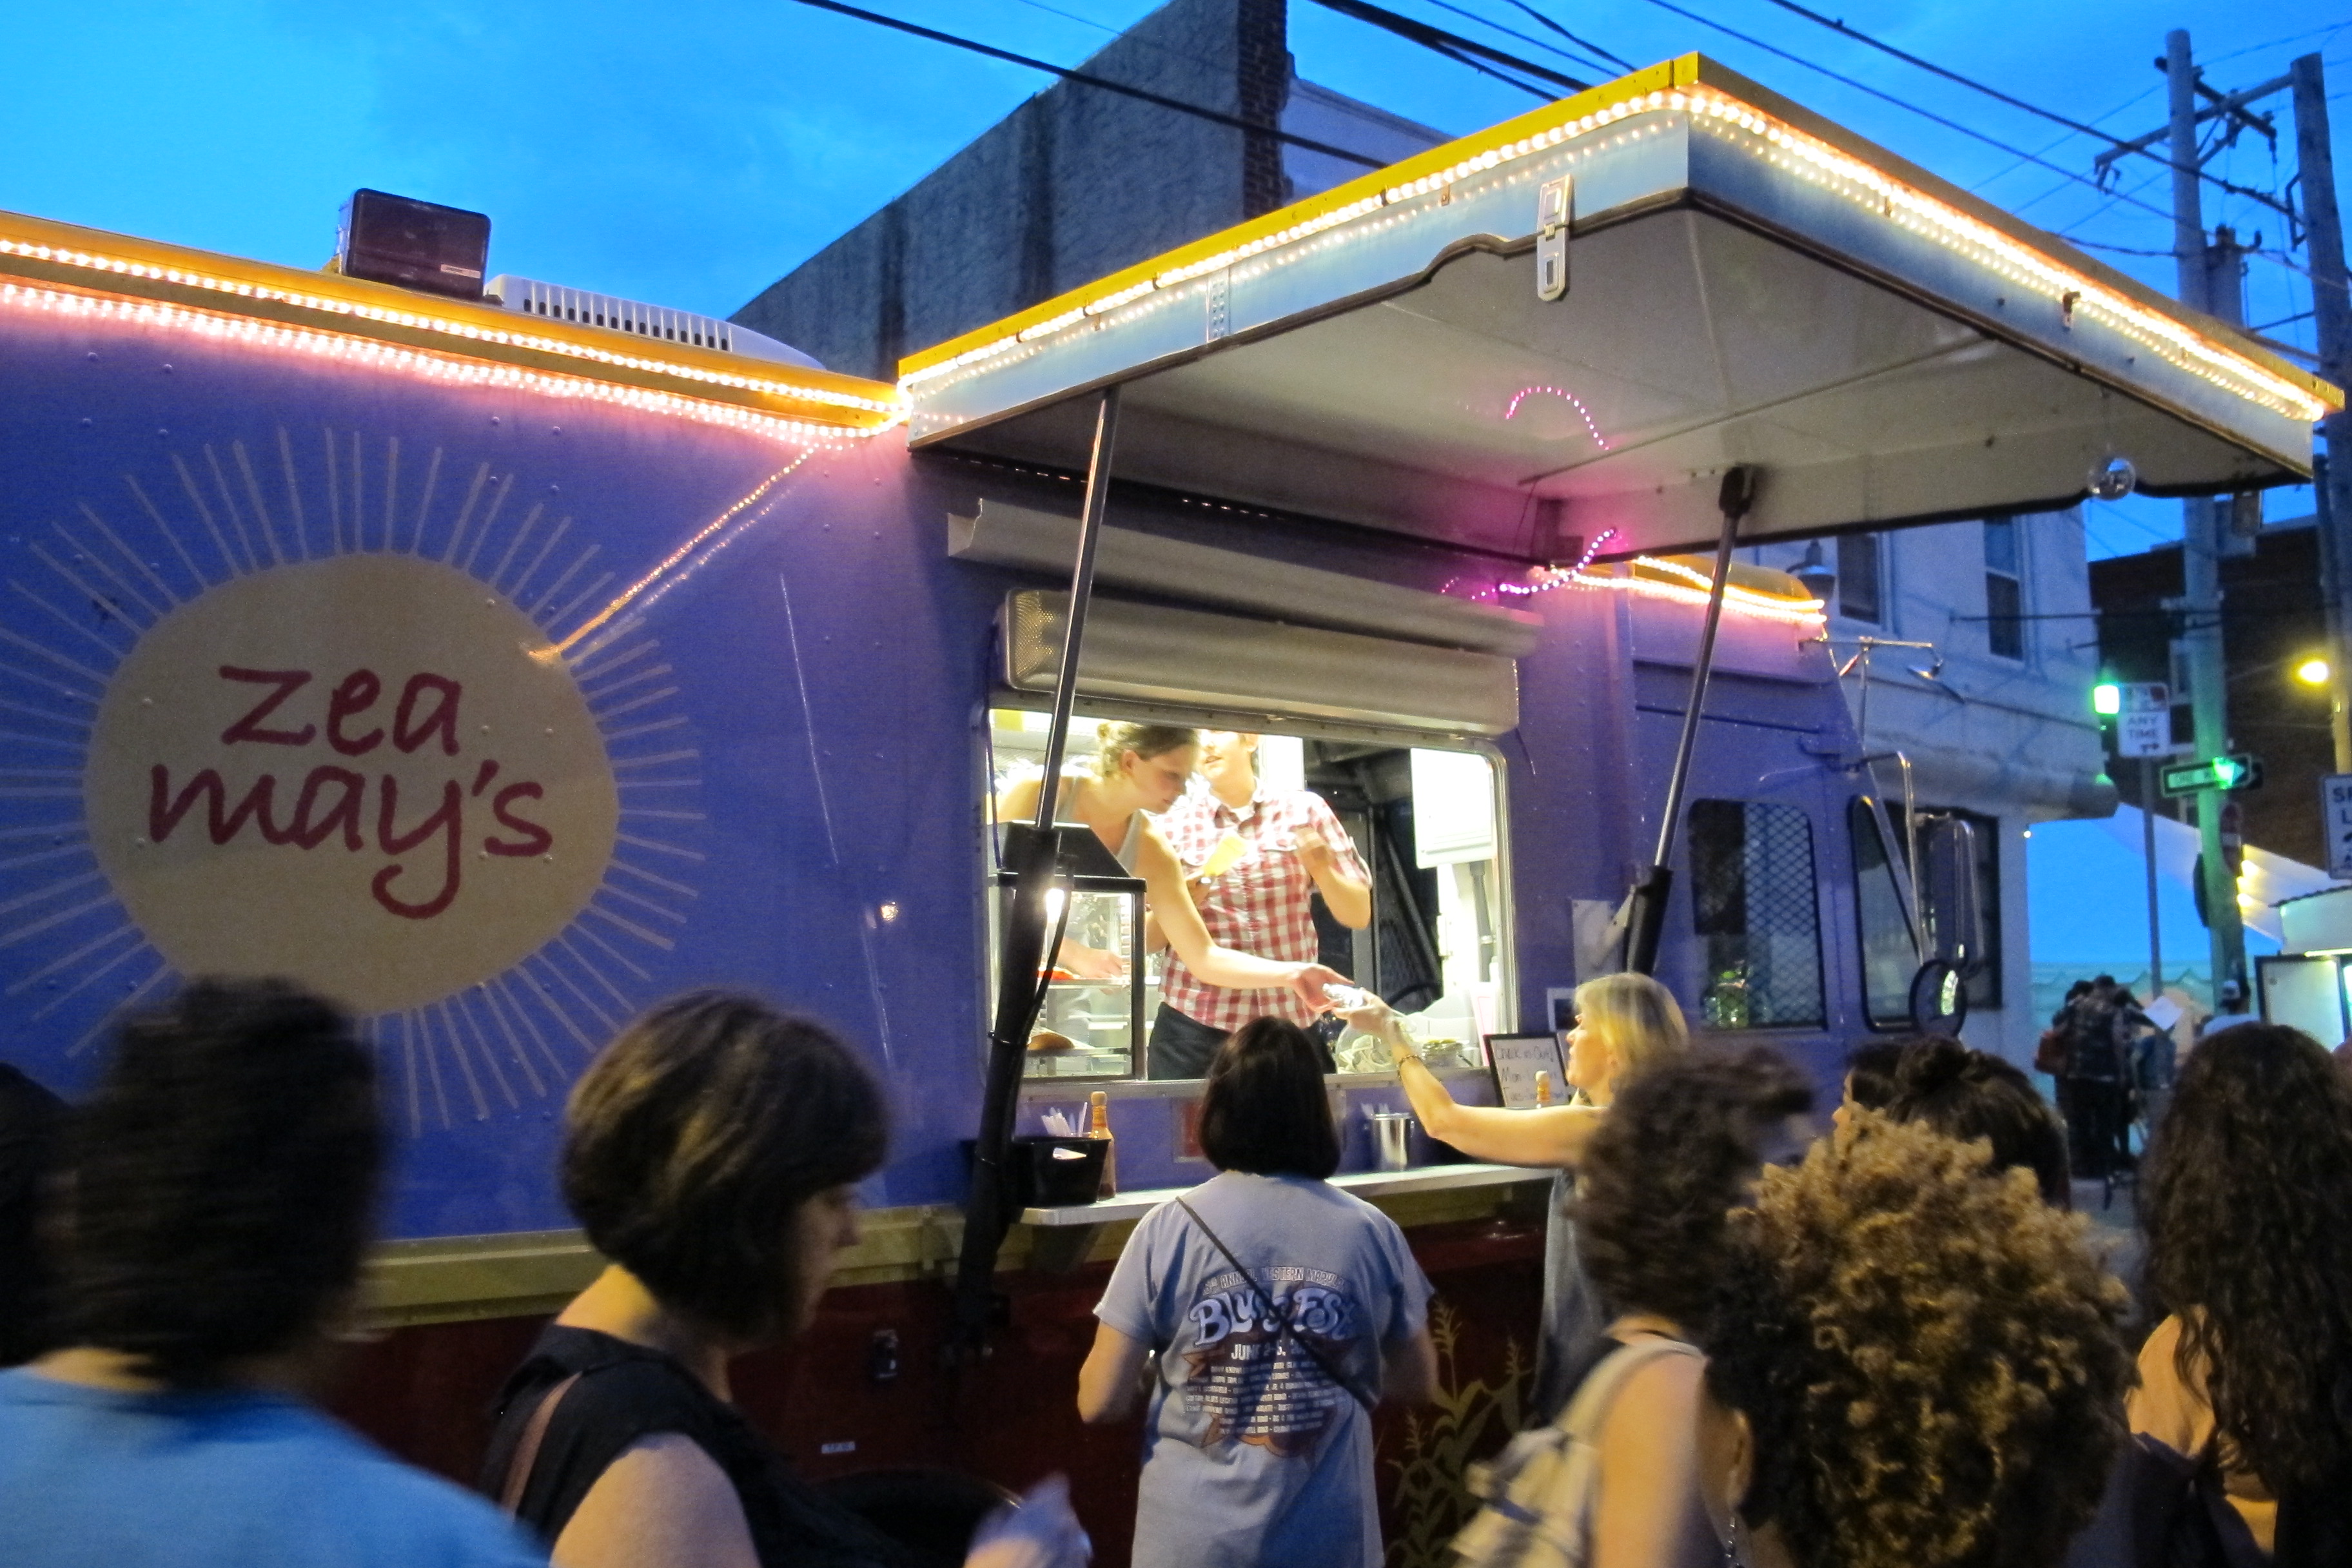 On Thursday Night Market returns to Germantown Avenue in Mt. Airy with more than 50 vendors.